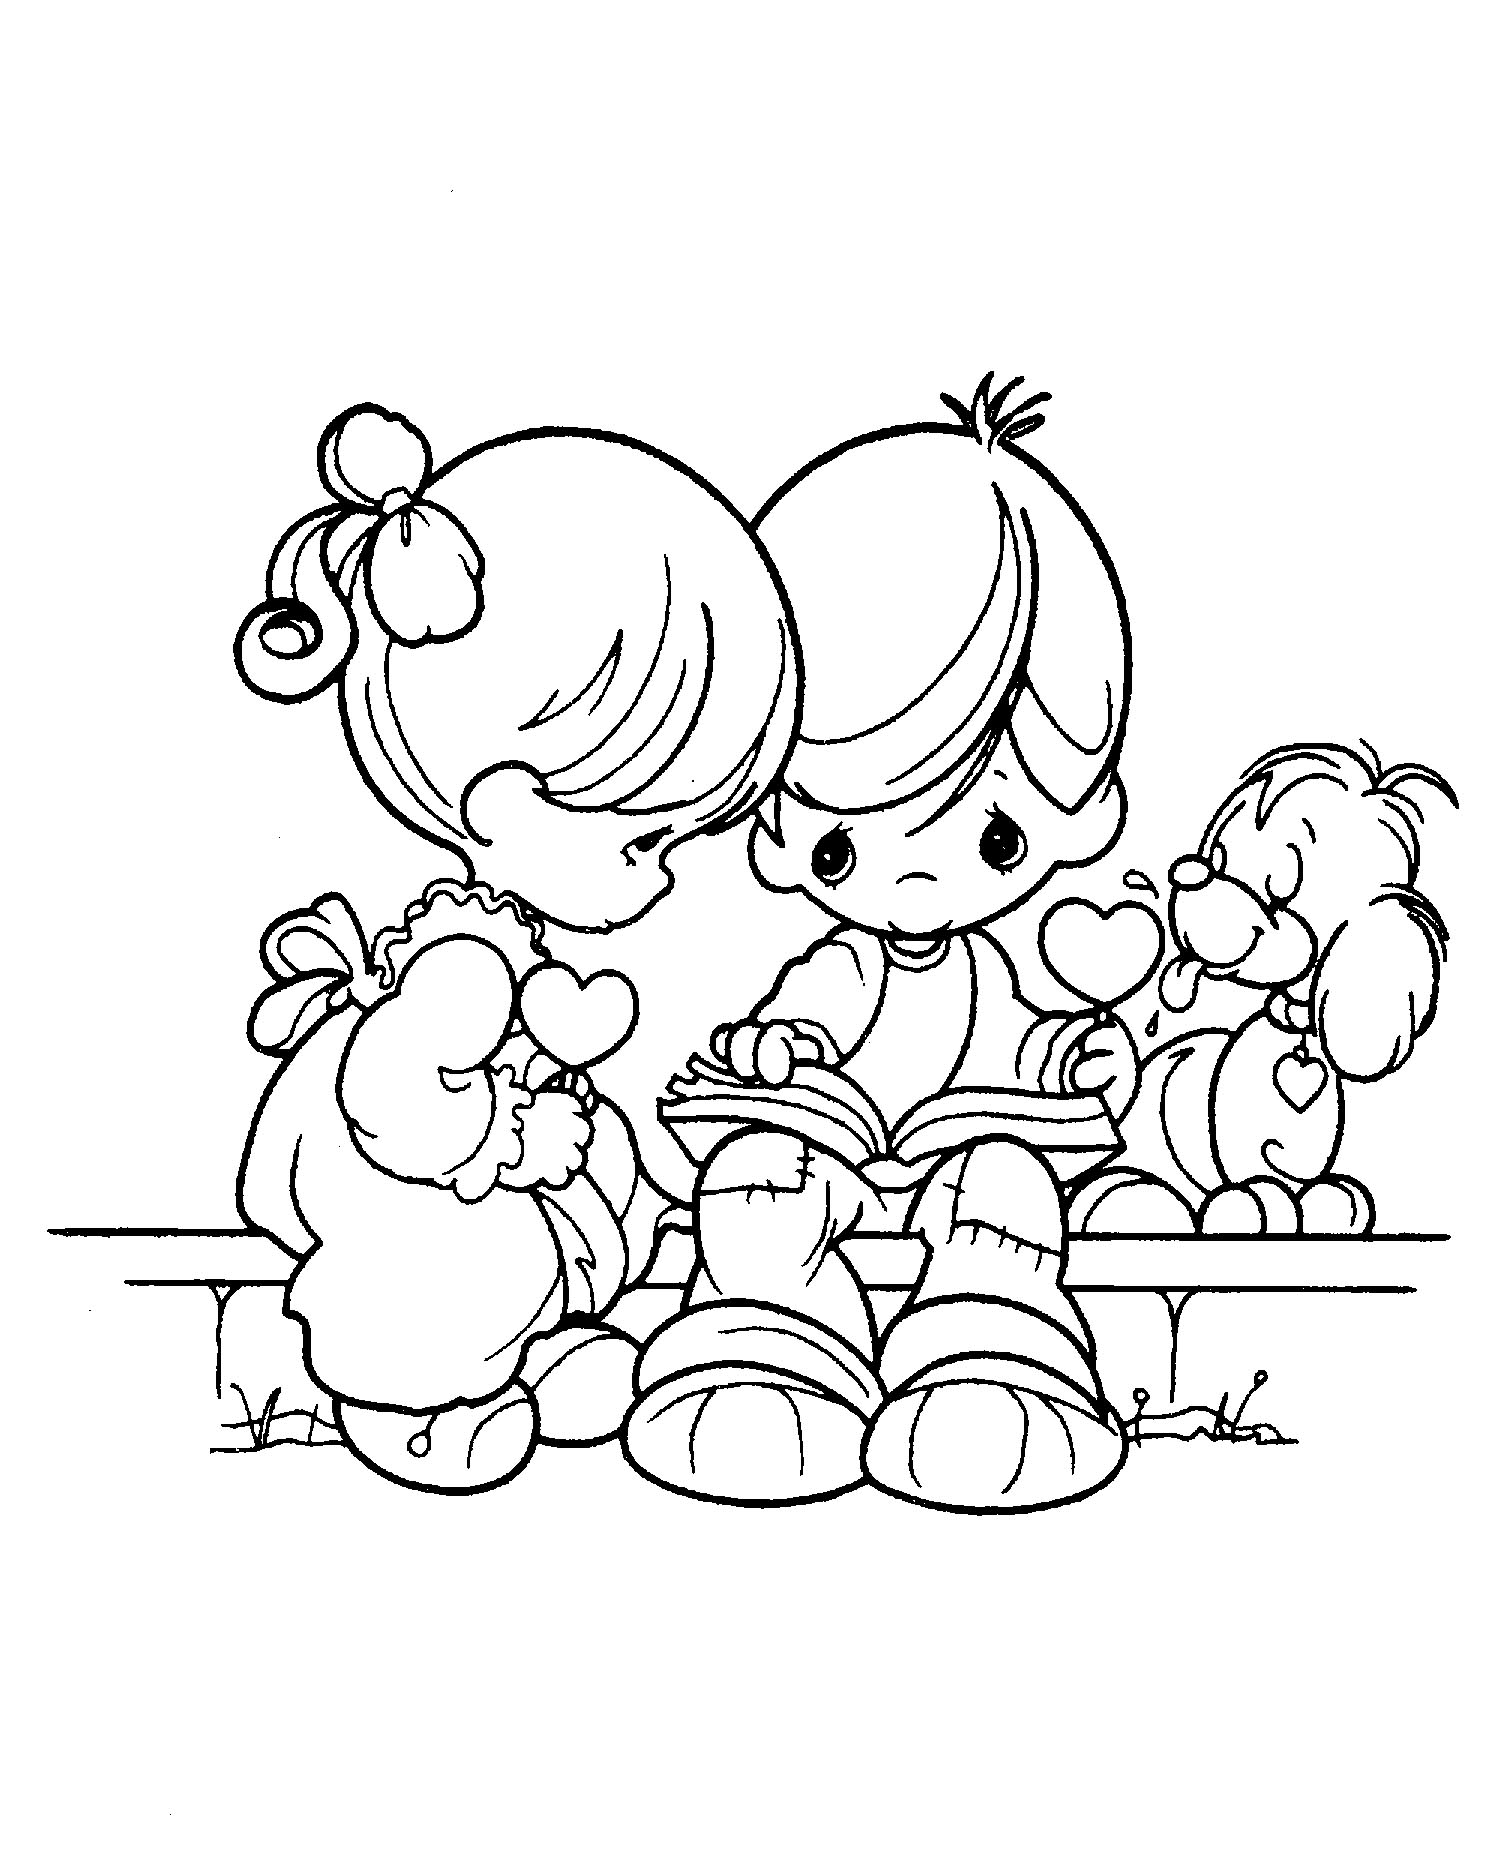 Little Boy Coloring Pages Little Boy And Girl Coloring Pages At Getdrawings Free For